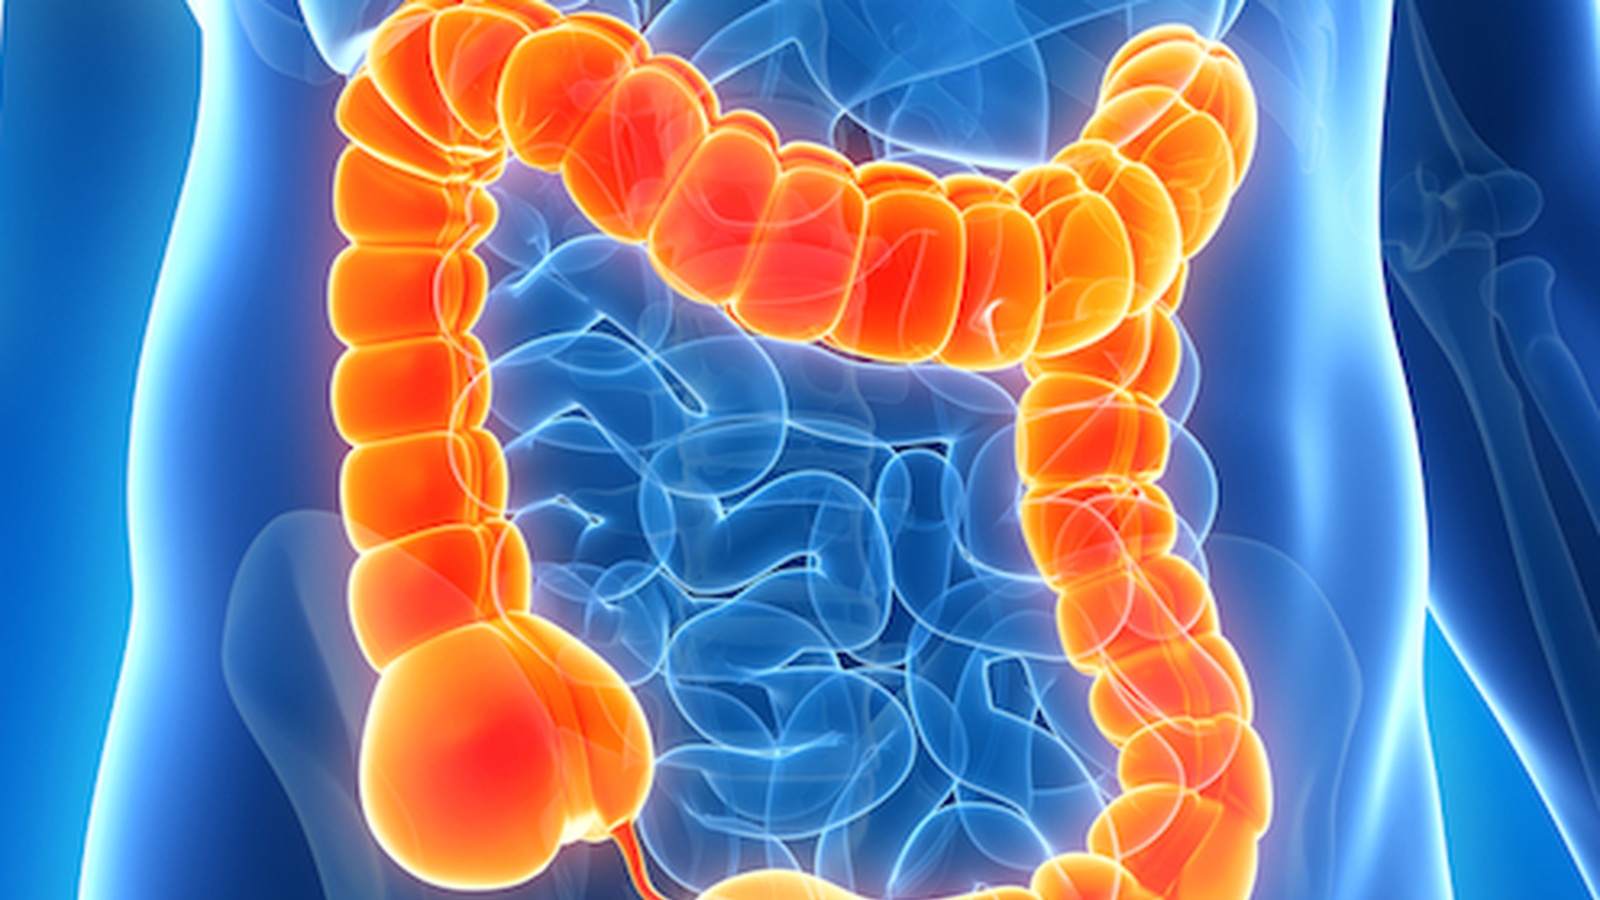 Colon Hydrotherapy - The Therapy that Even Doctors are Recommending